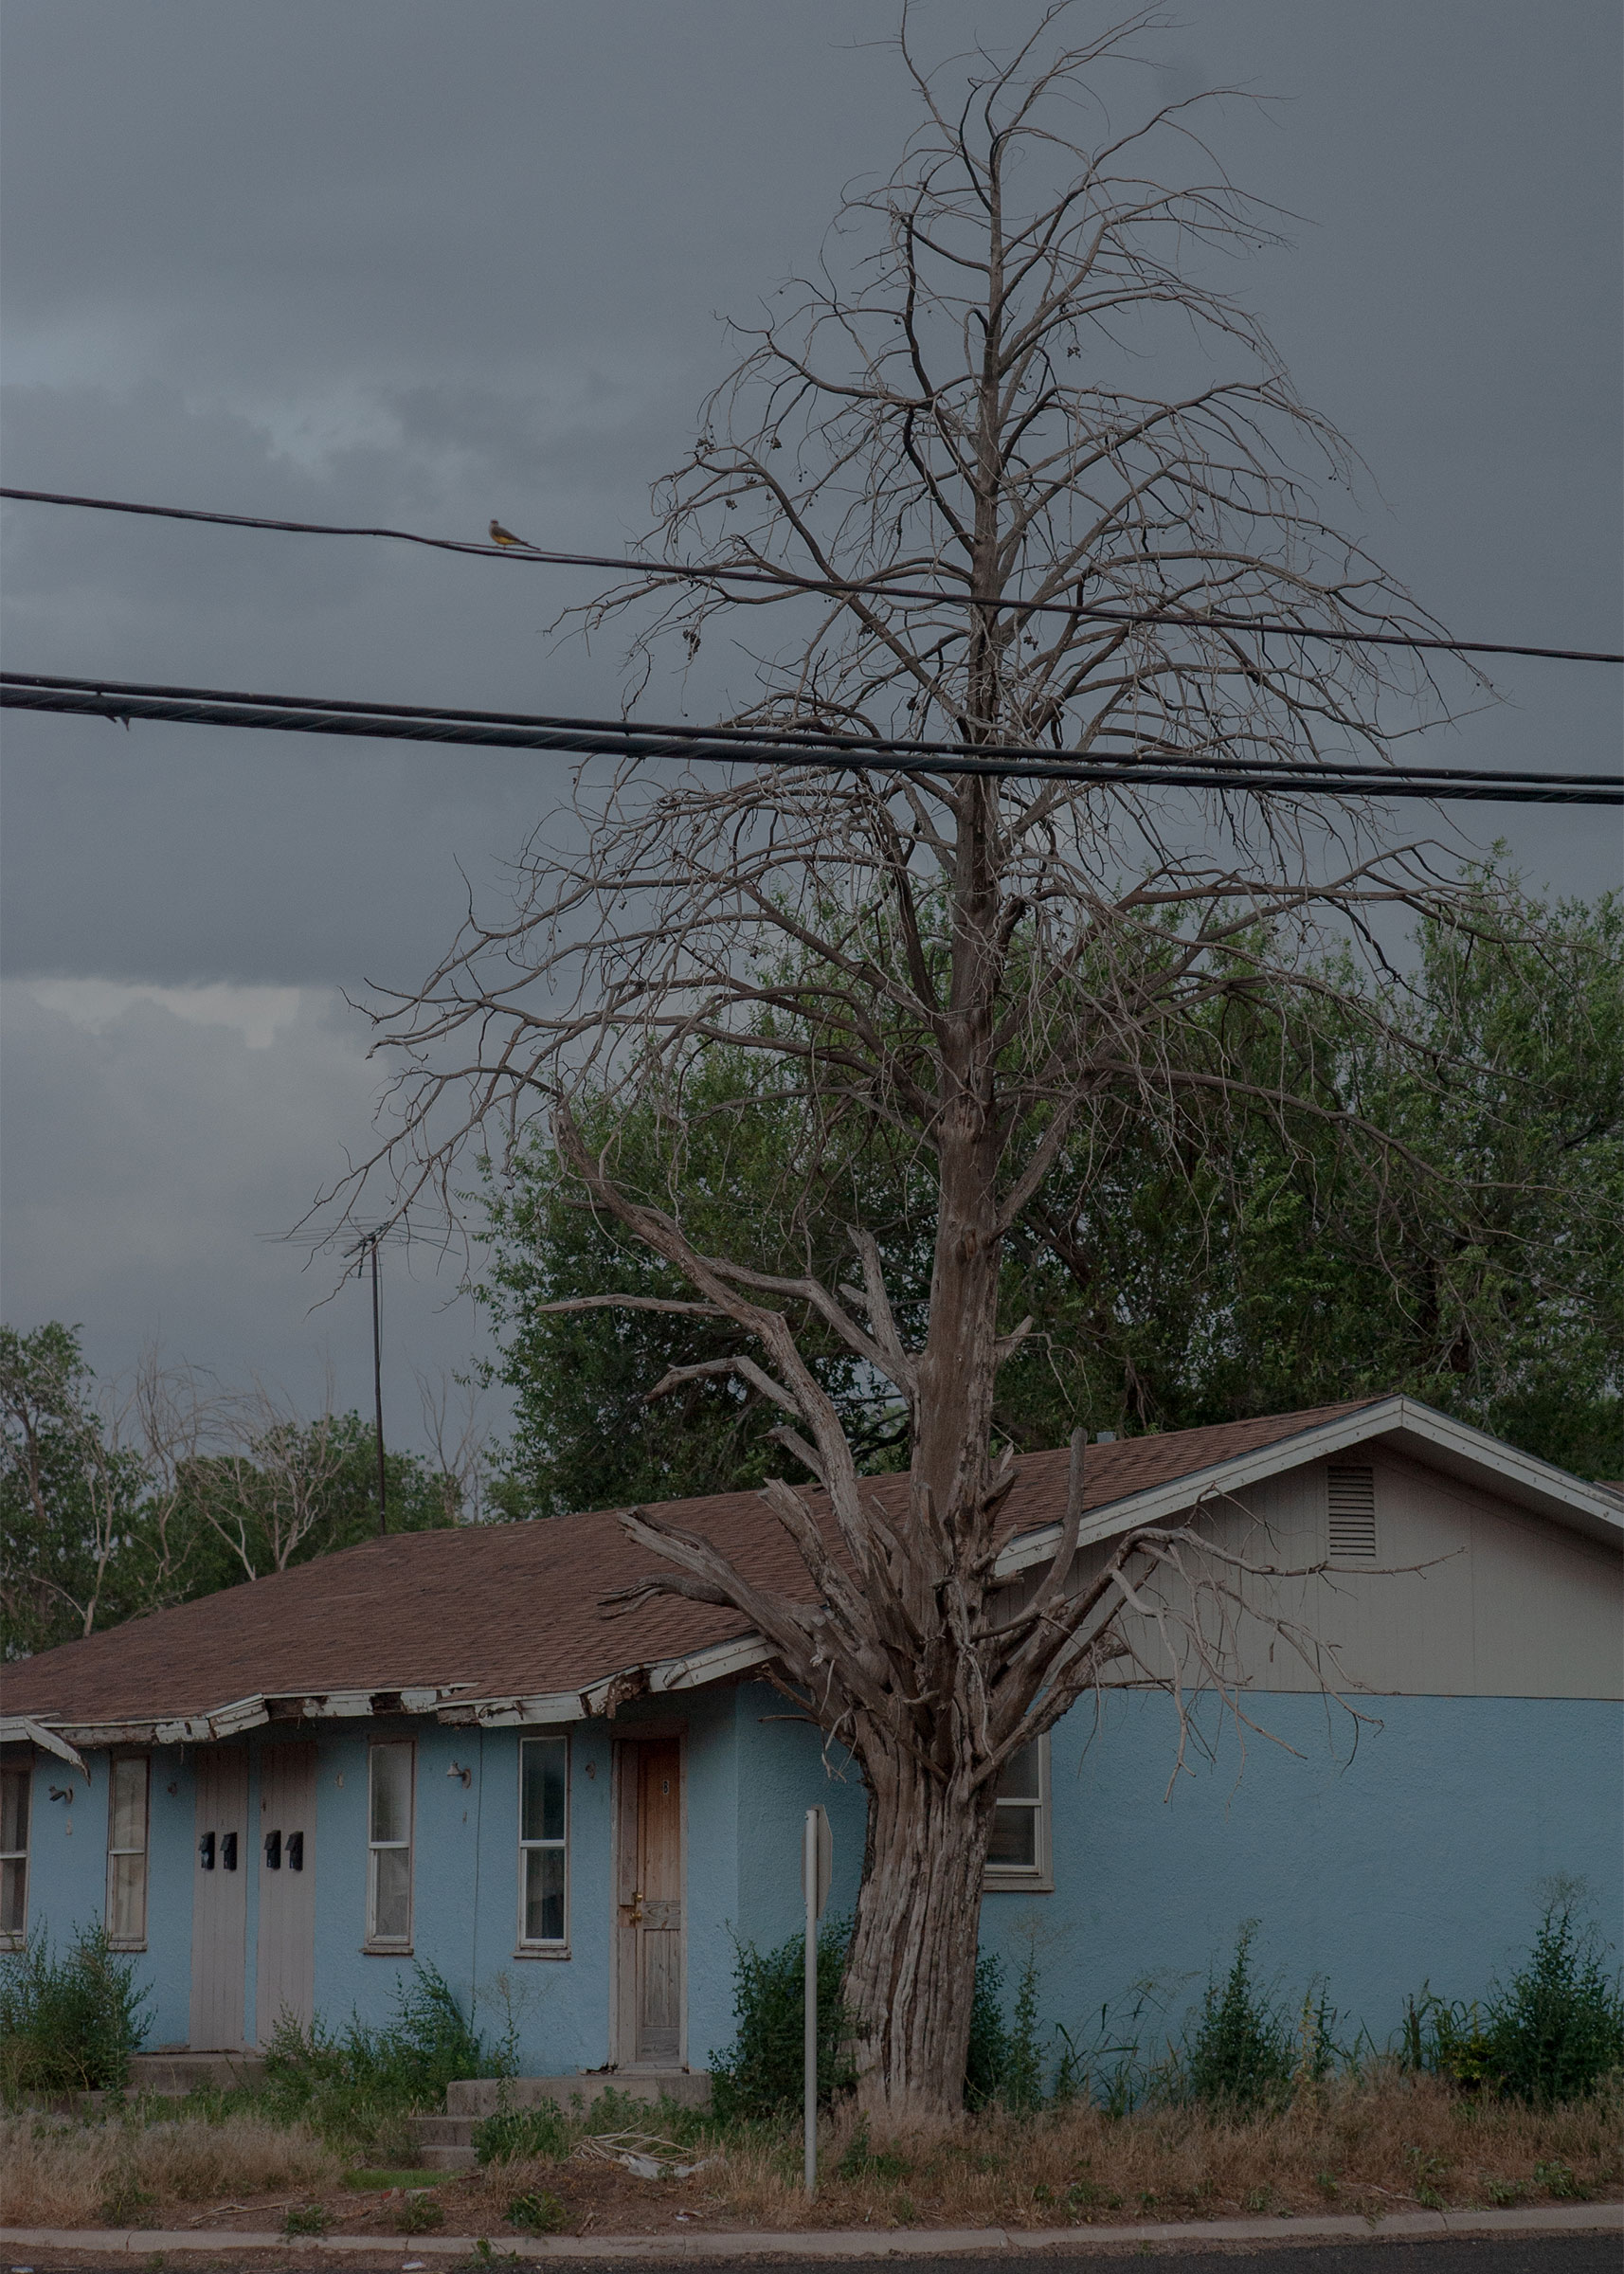 A suburb in Littlefield, Texas on June 25, 2022.